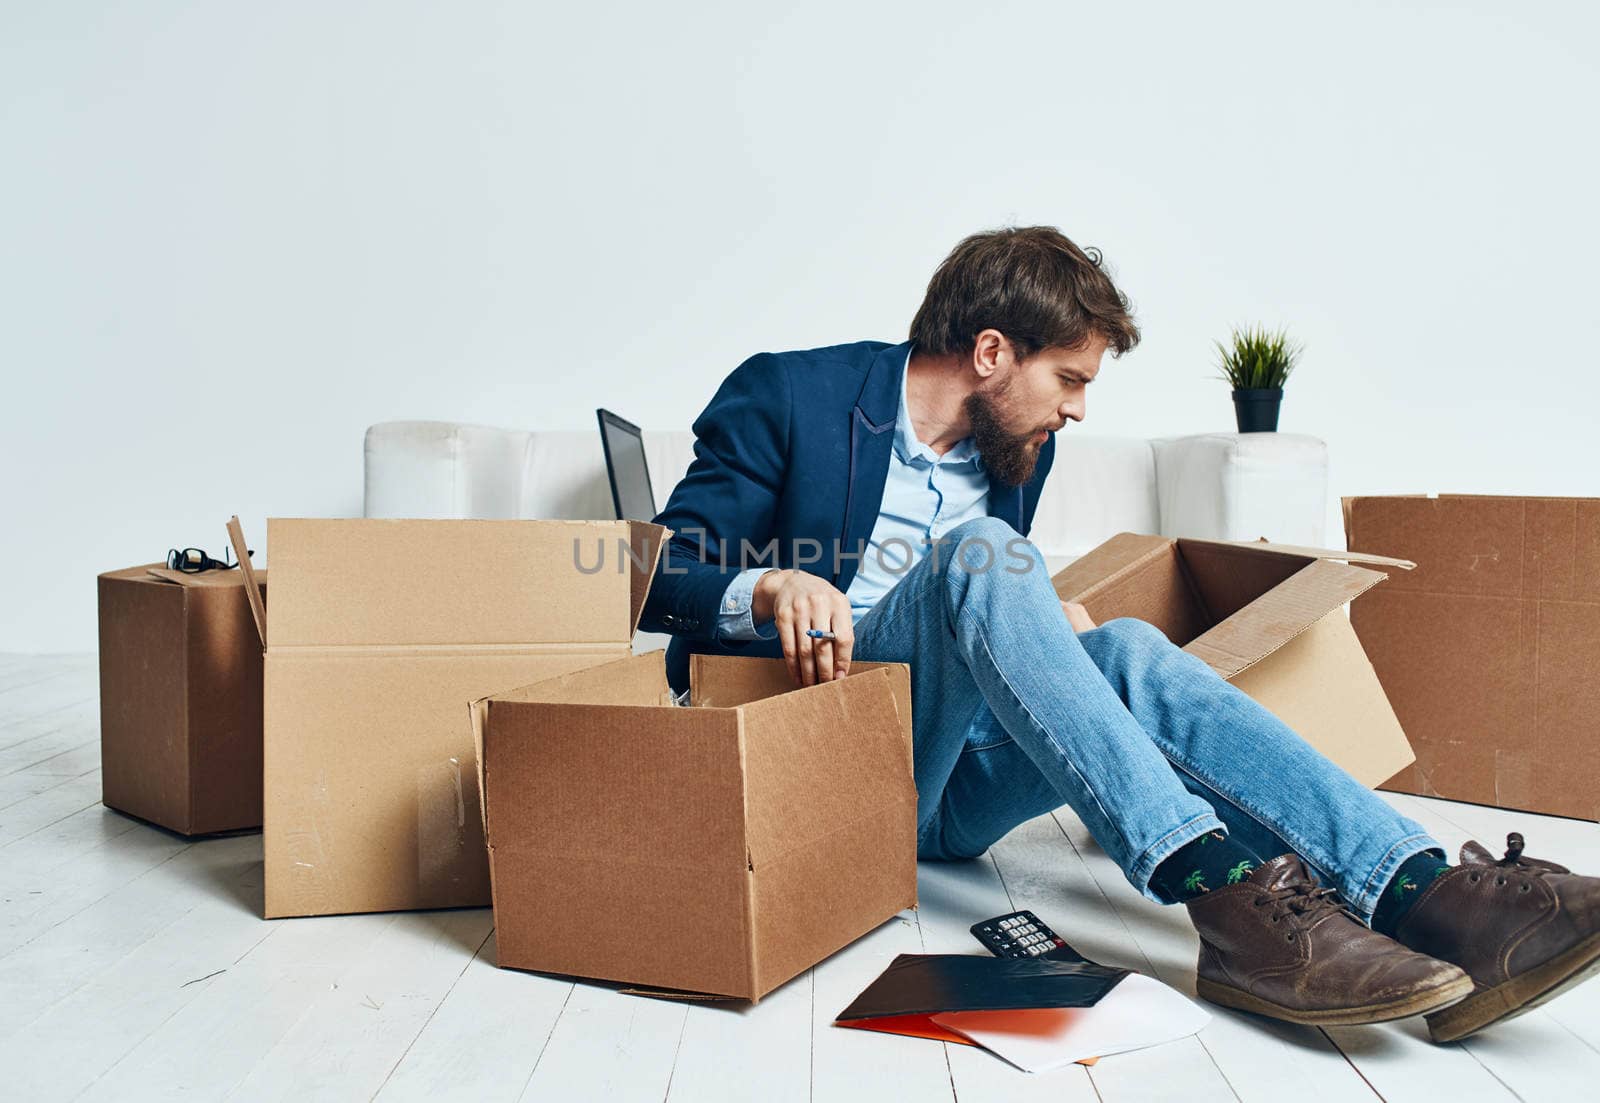 Business man picking up cardboard boxes and moving to a new place lifestyle by SHOTPRIME